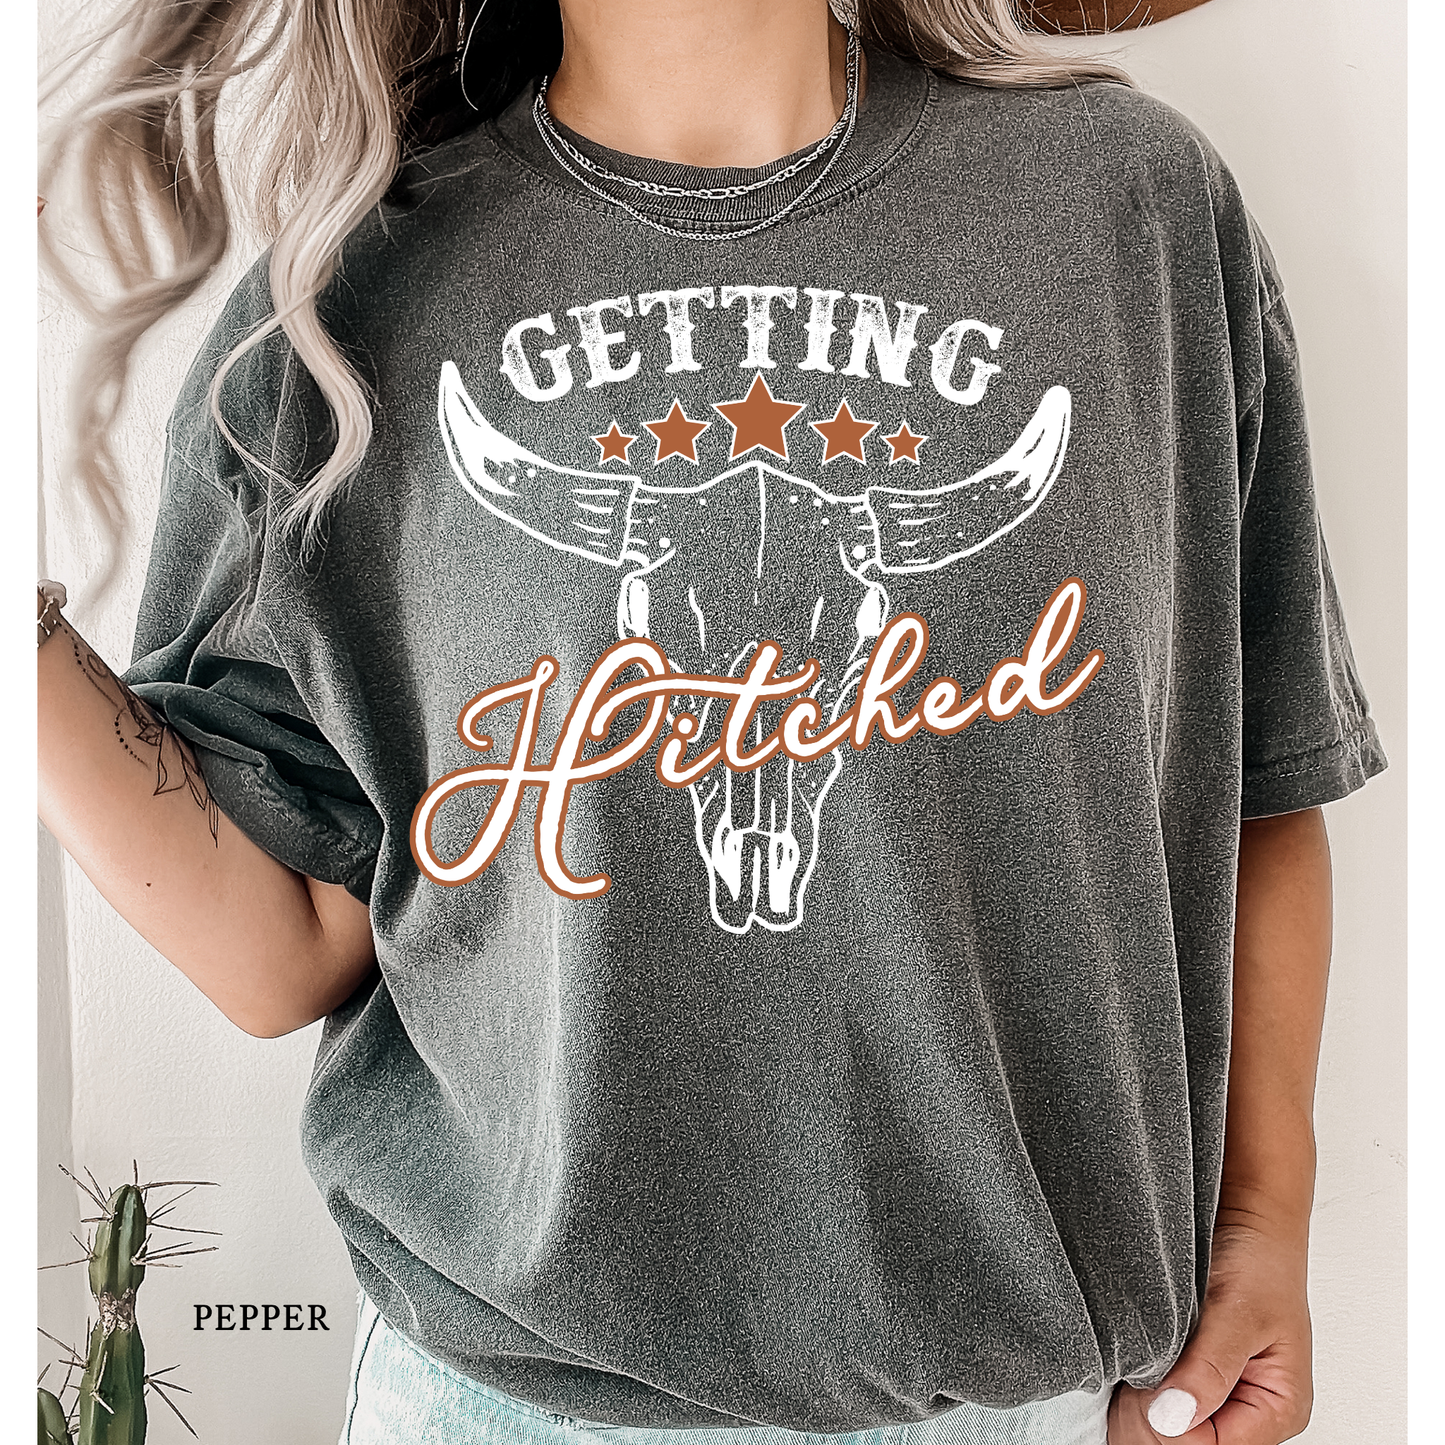 Getting Hitched | Bridal Party | Bachelorette Party | Comfort Color Short Sleeve Graphic Tees